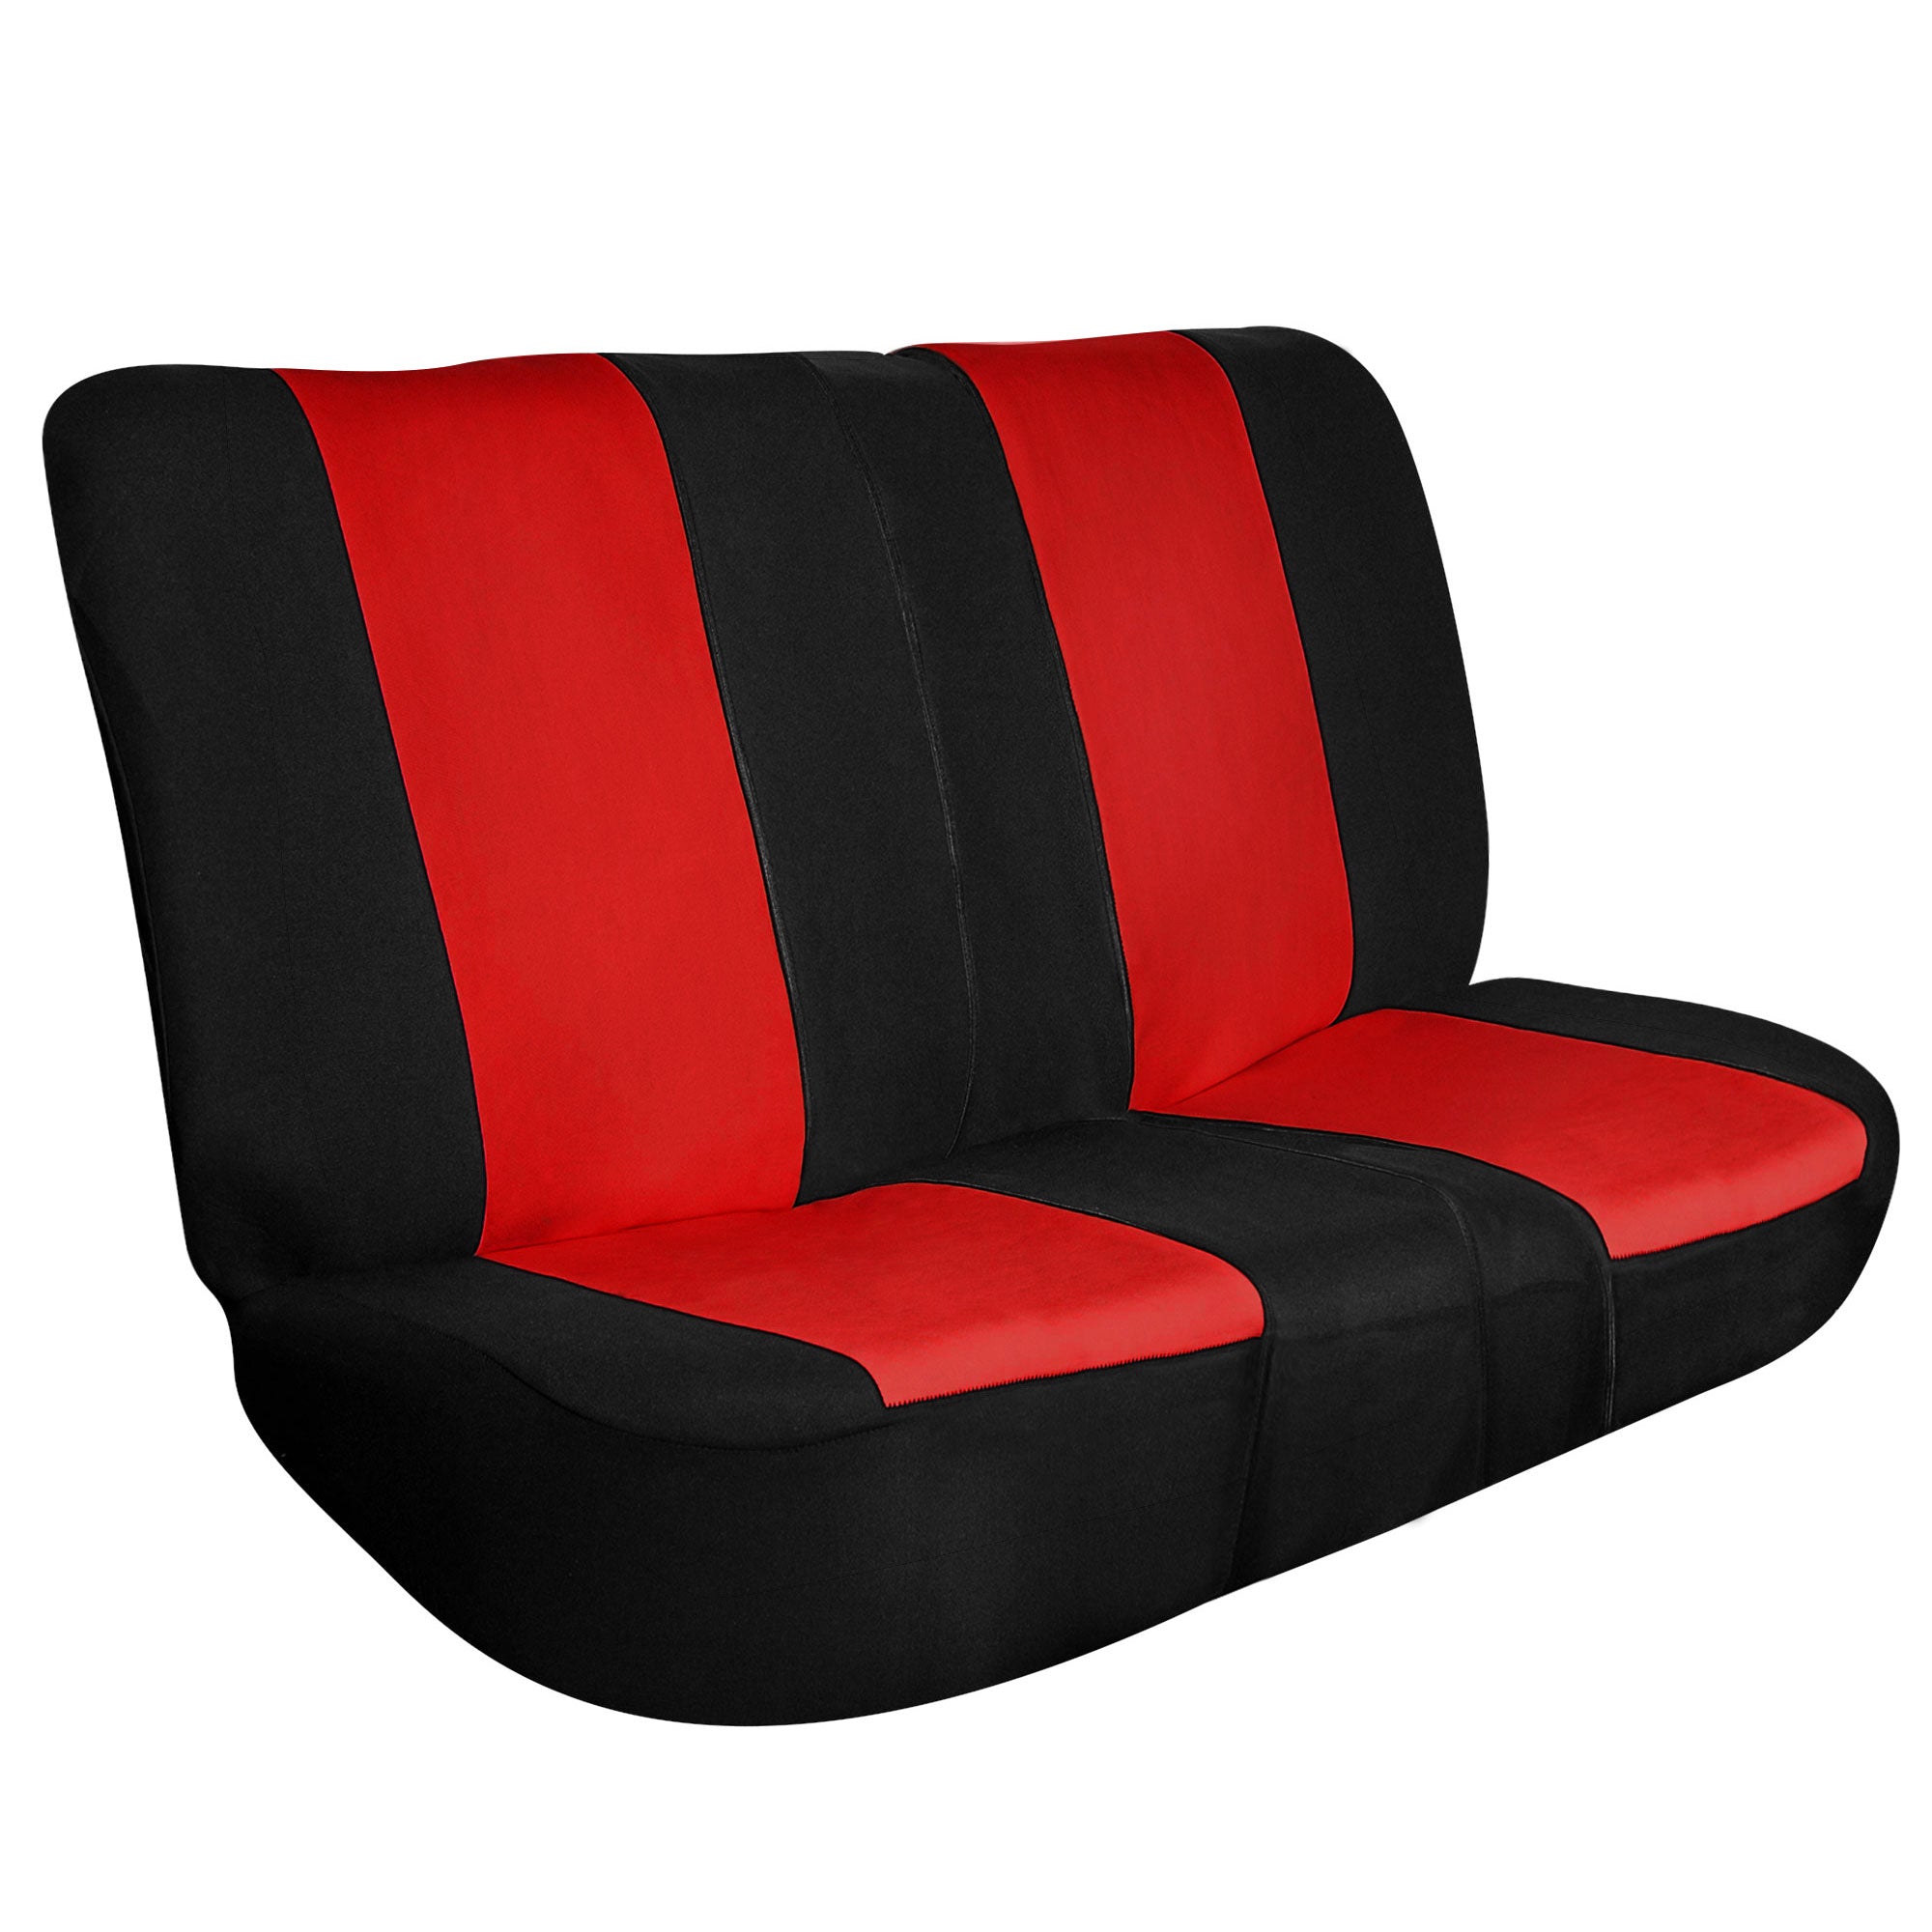 Full Coverage Flat Cloth Seat Covers - Rear Red